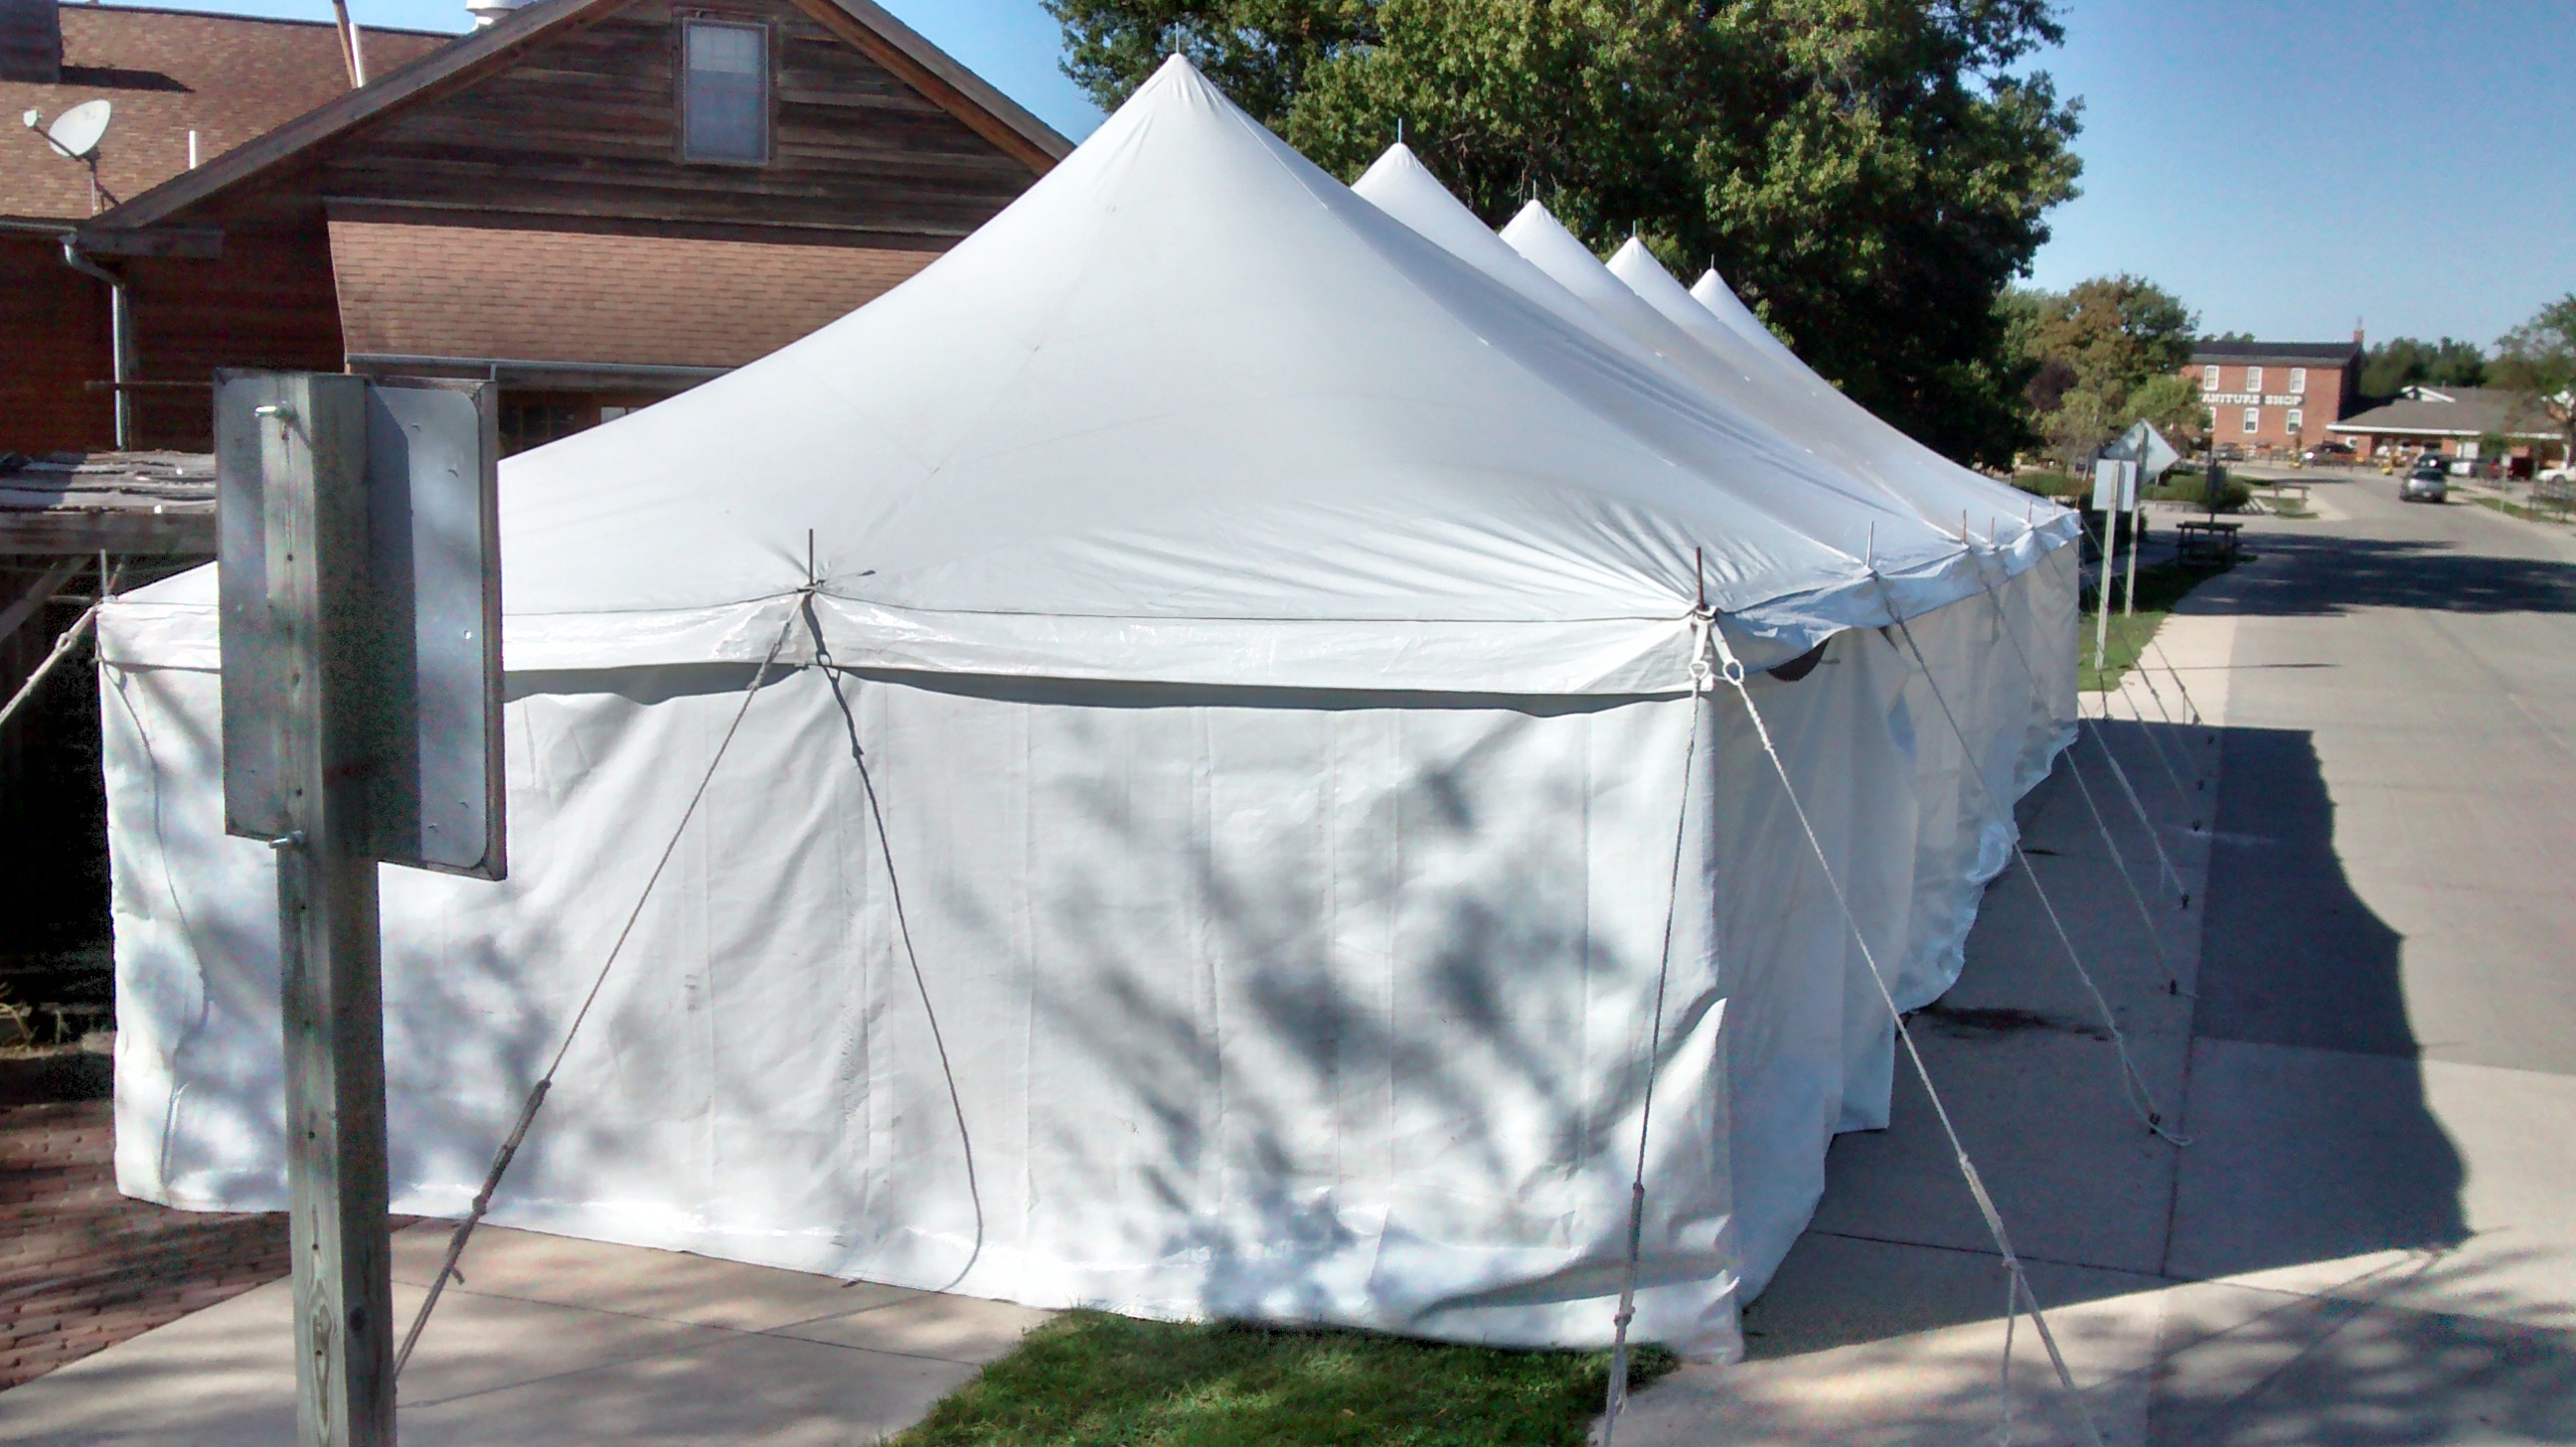 End of 20' x 60' rope and pole tent with sidewall at Millstream Brewing Company in Amana, IA